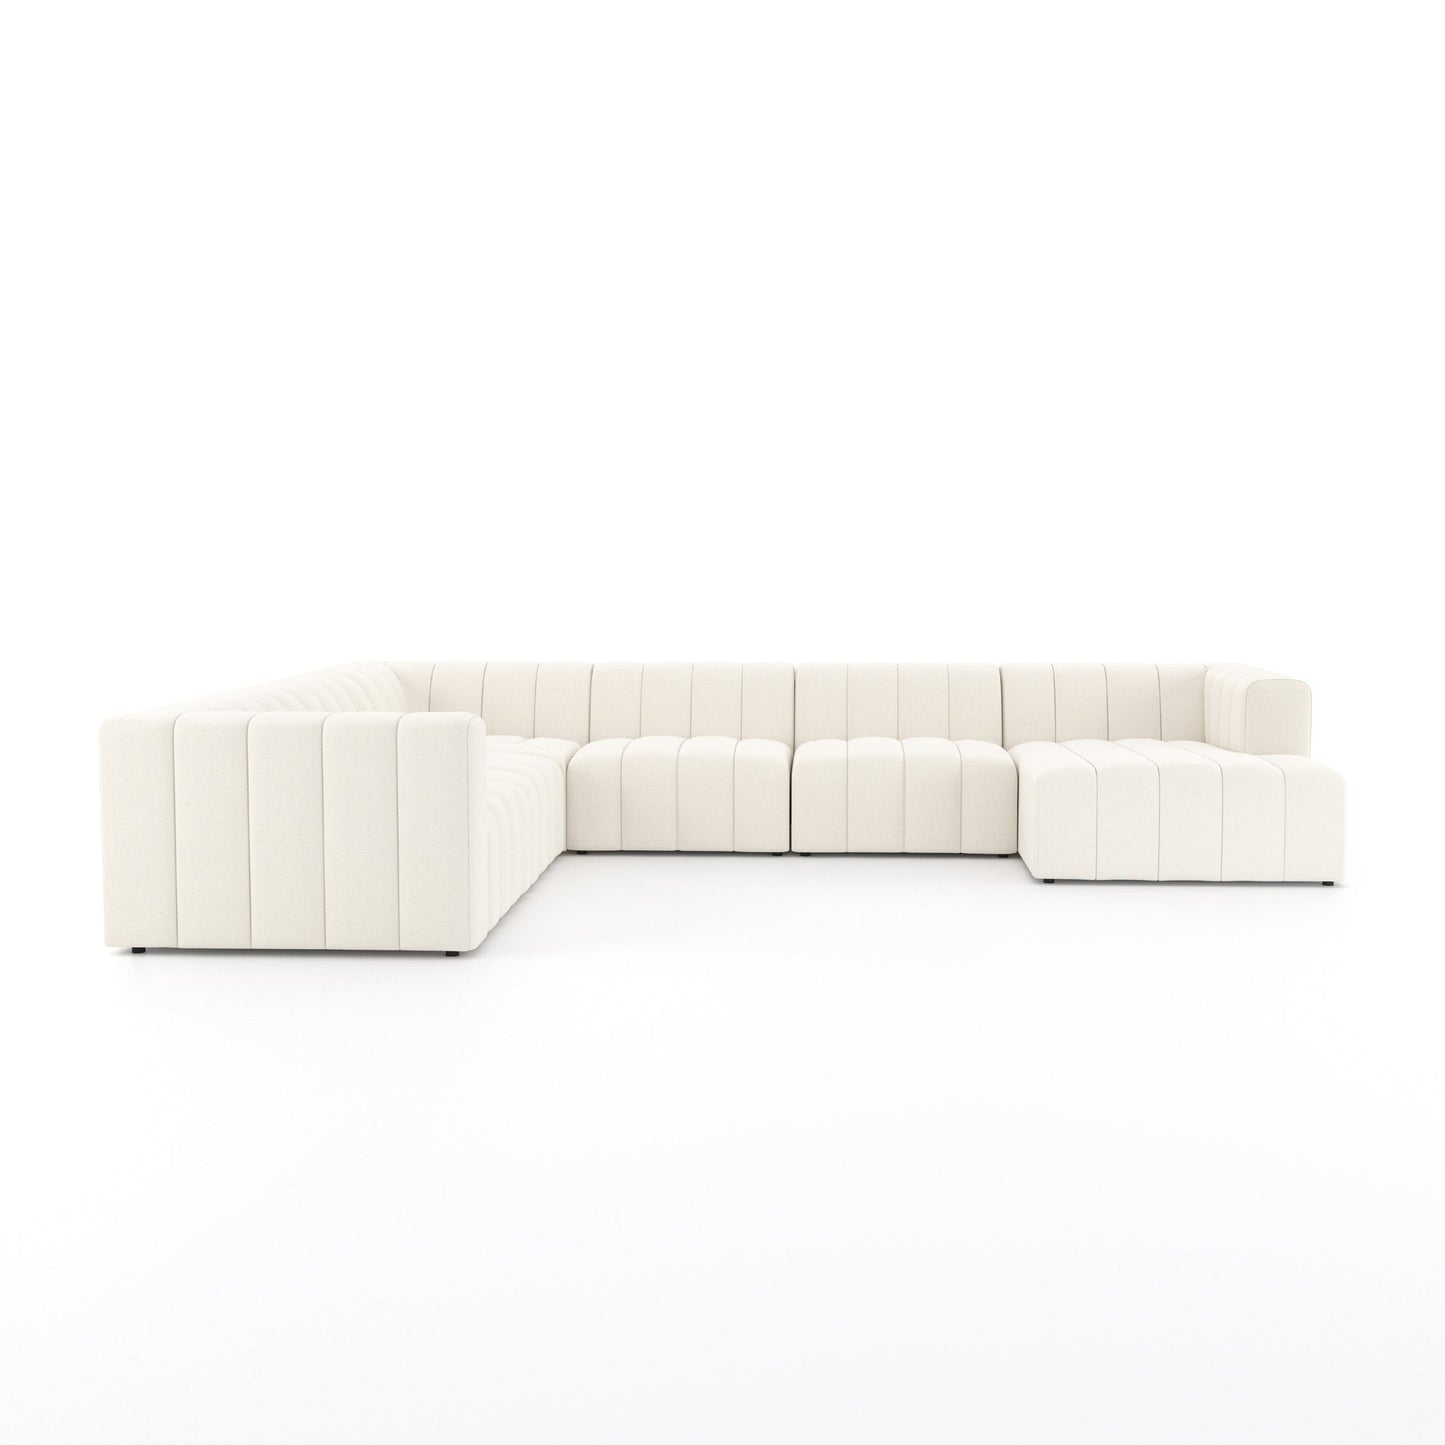 MOONLIT SECTIONAL